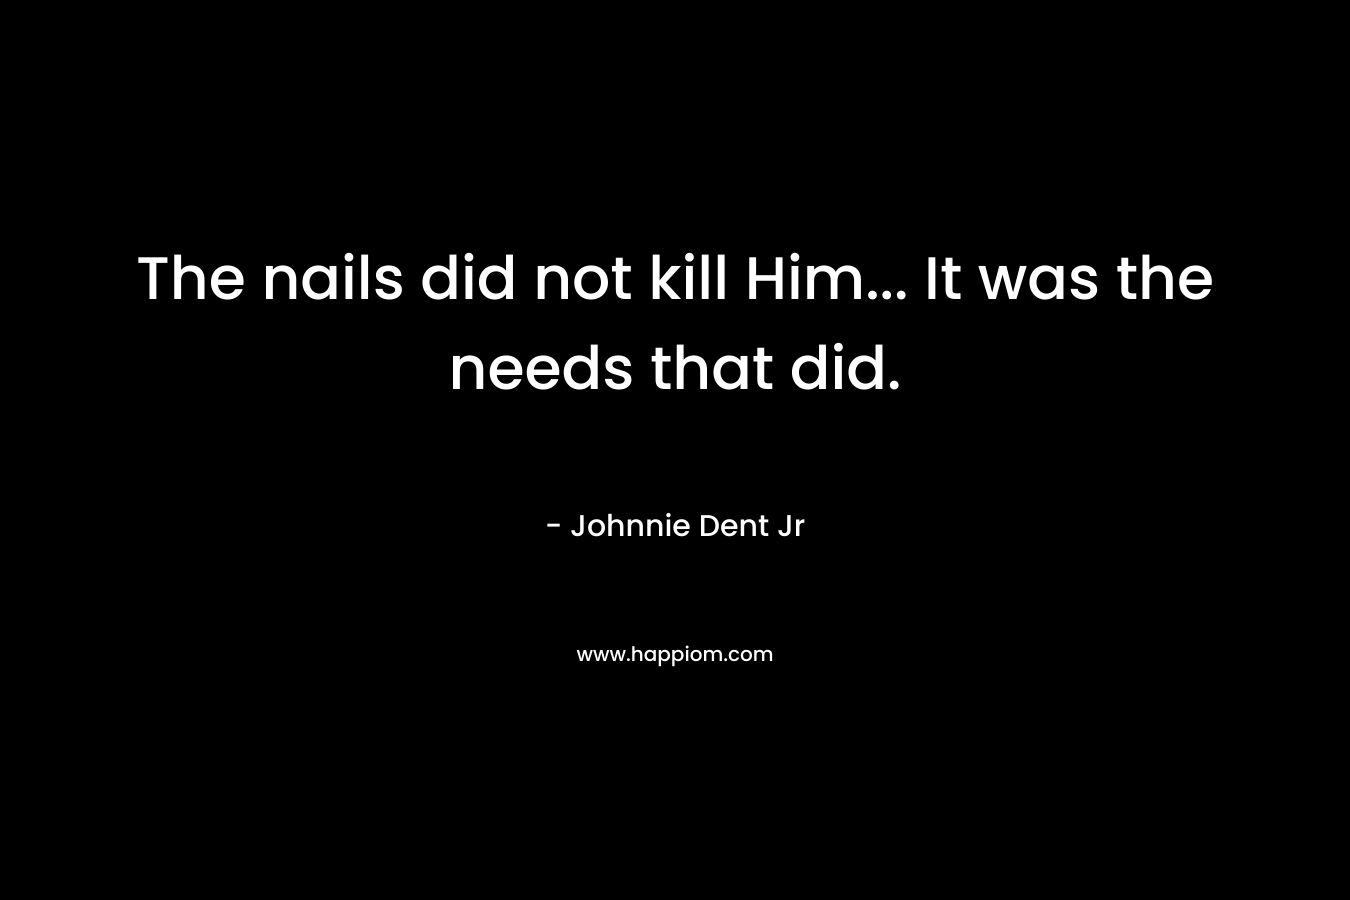 The nails did not kill Him... It was the needs that did.